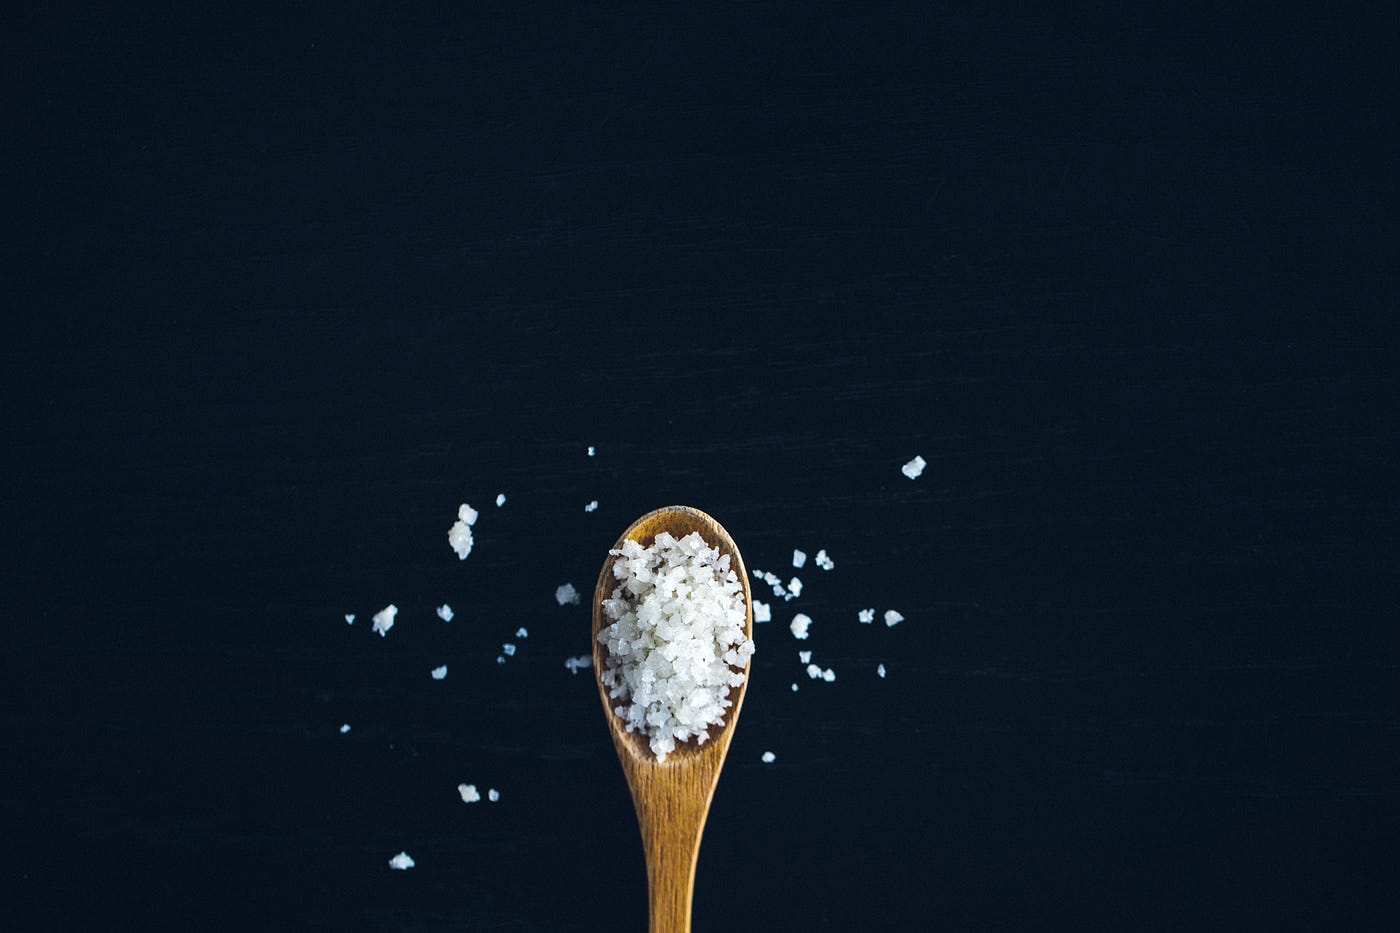 A small wooden spoon emerges from the bottom of the image, holding coarse salt that is spilling onto the black background. Limiting sodium intake is one of the 5 natural ways to drop your blood pressure.